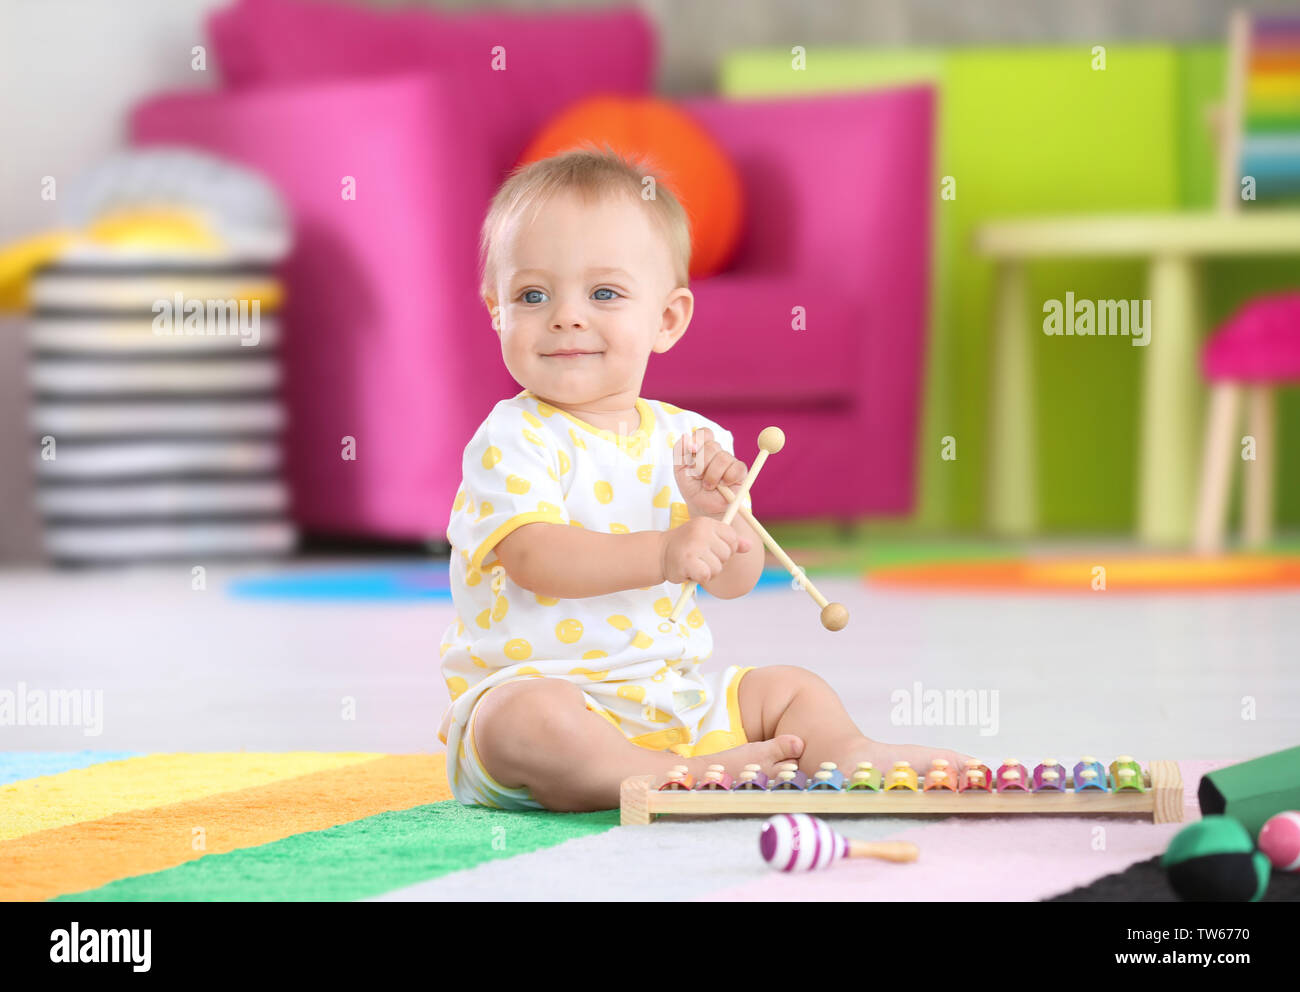 Cute little baby playing with musical instrument at home Stock Photo